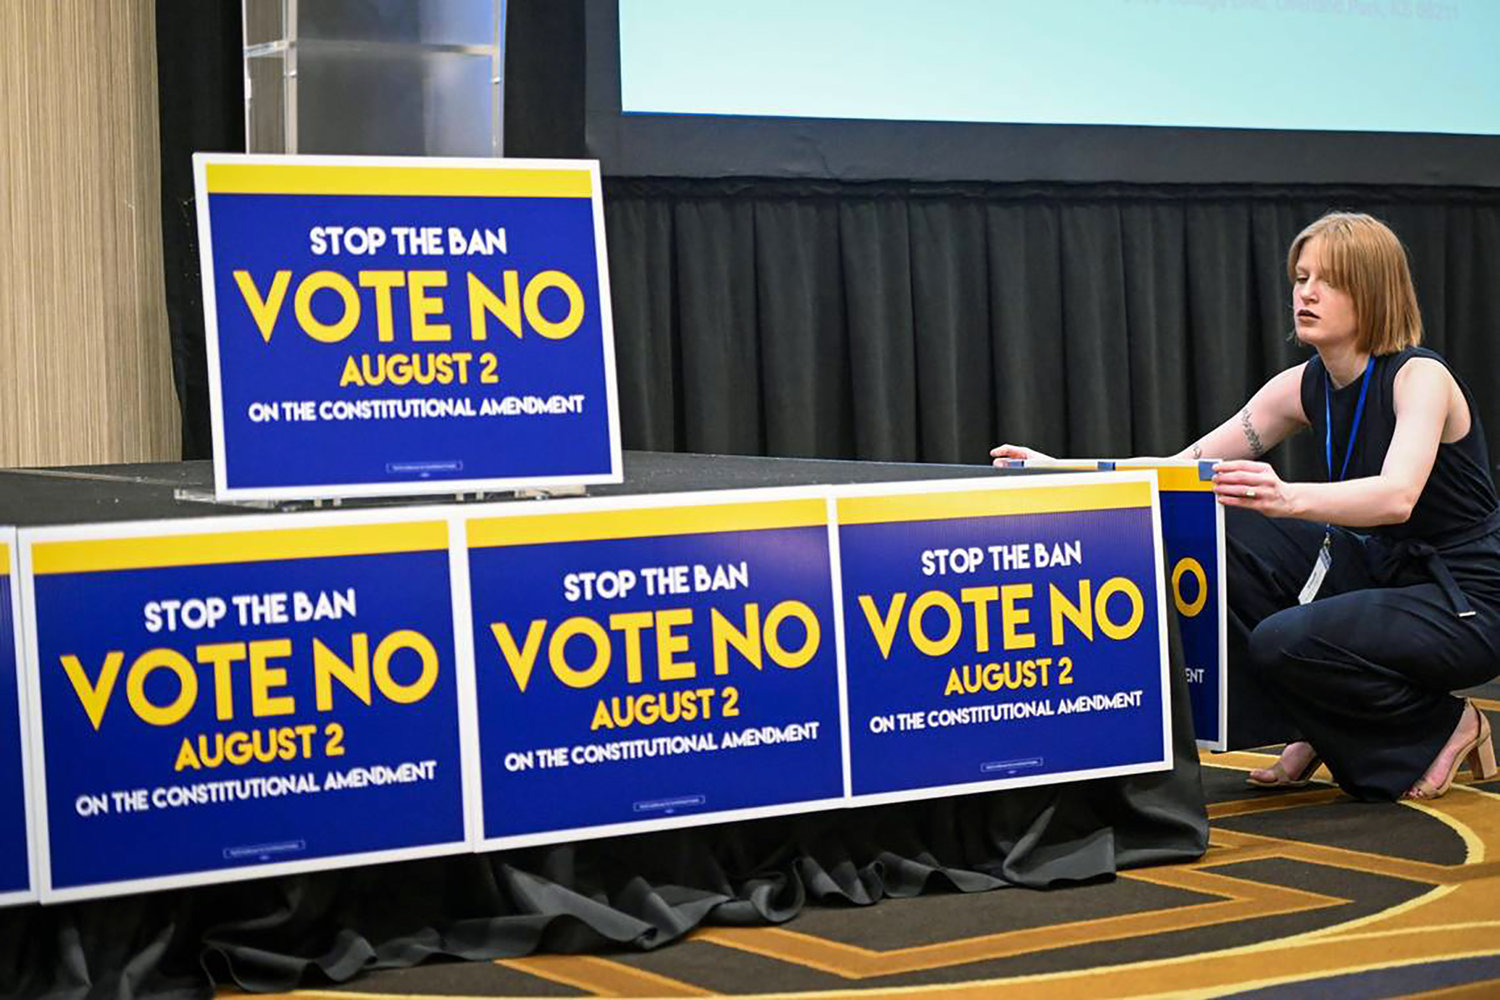 Jae Gray, a field organizer with Kansans for Constitutional Freedom, posted signs at the watch party for election results Tuesday, Aug. 2, 2022, at the Overland Park Convention Center. The group was supporting a no vote on the constitutional amendment on the ballot. (Tammy Ljungblad/The Kansas City Star/TNS)